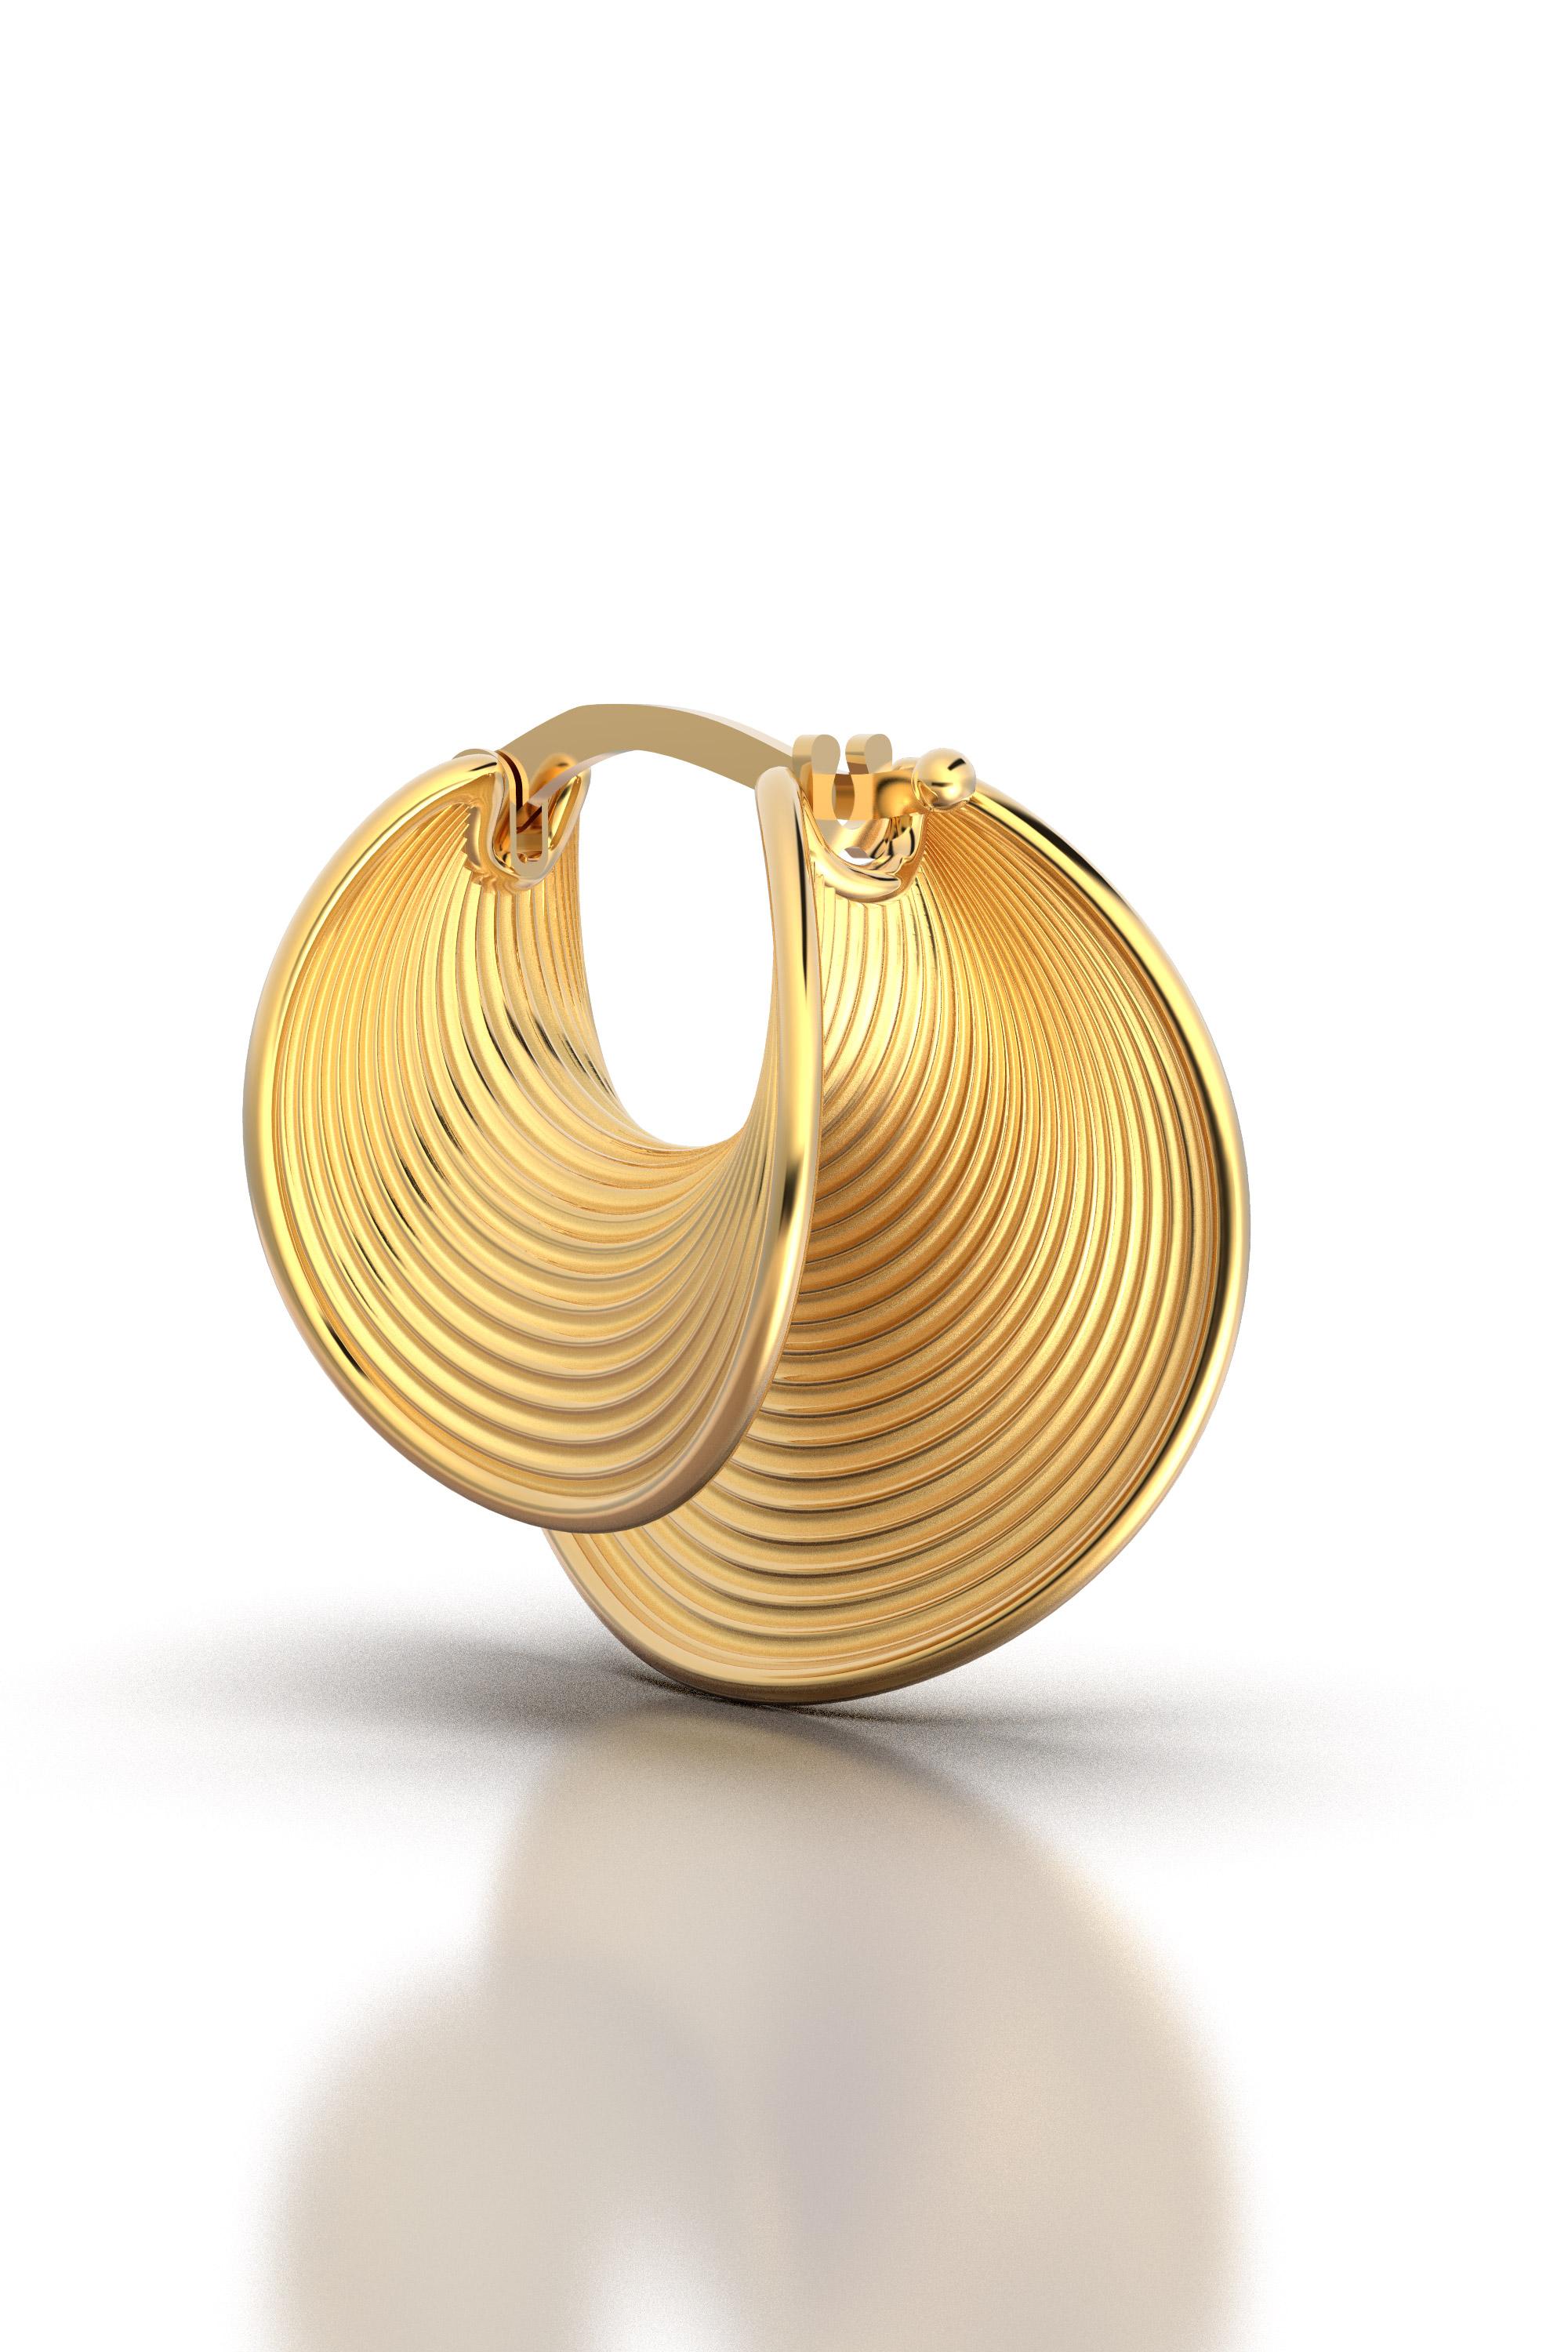 Oltremare Gioielli Gold Hoop Earrings, 18 karat Italian gold fine jewelry  In New Condition For Sale In Camisano Vicentino, VI